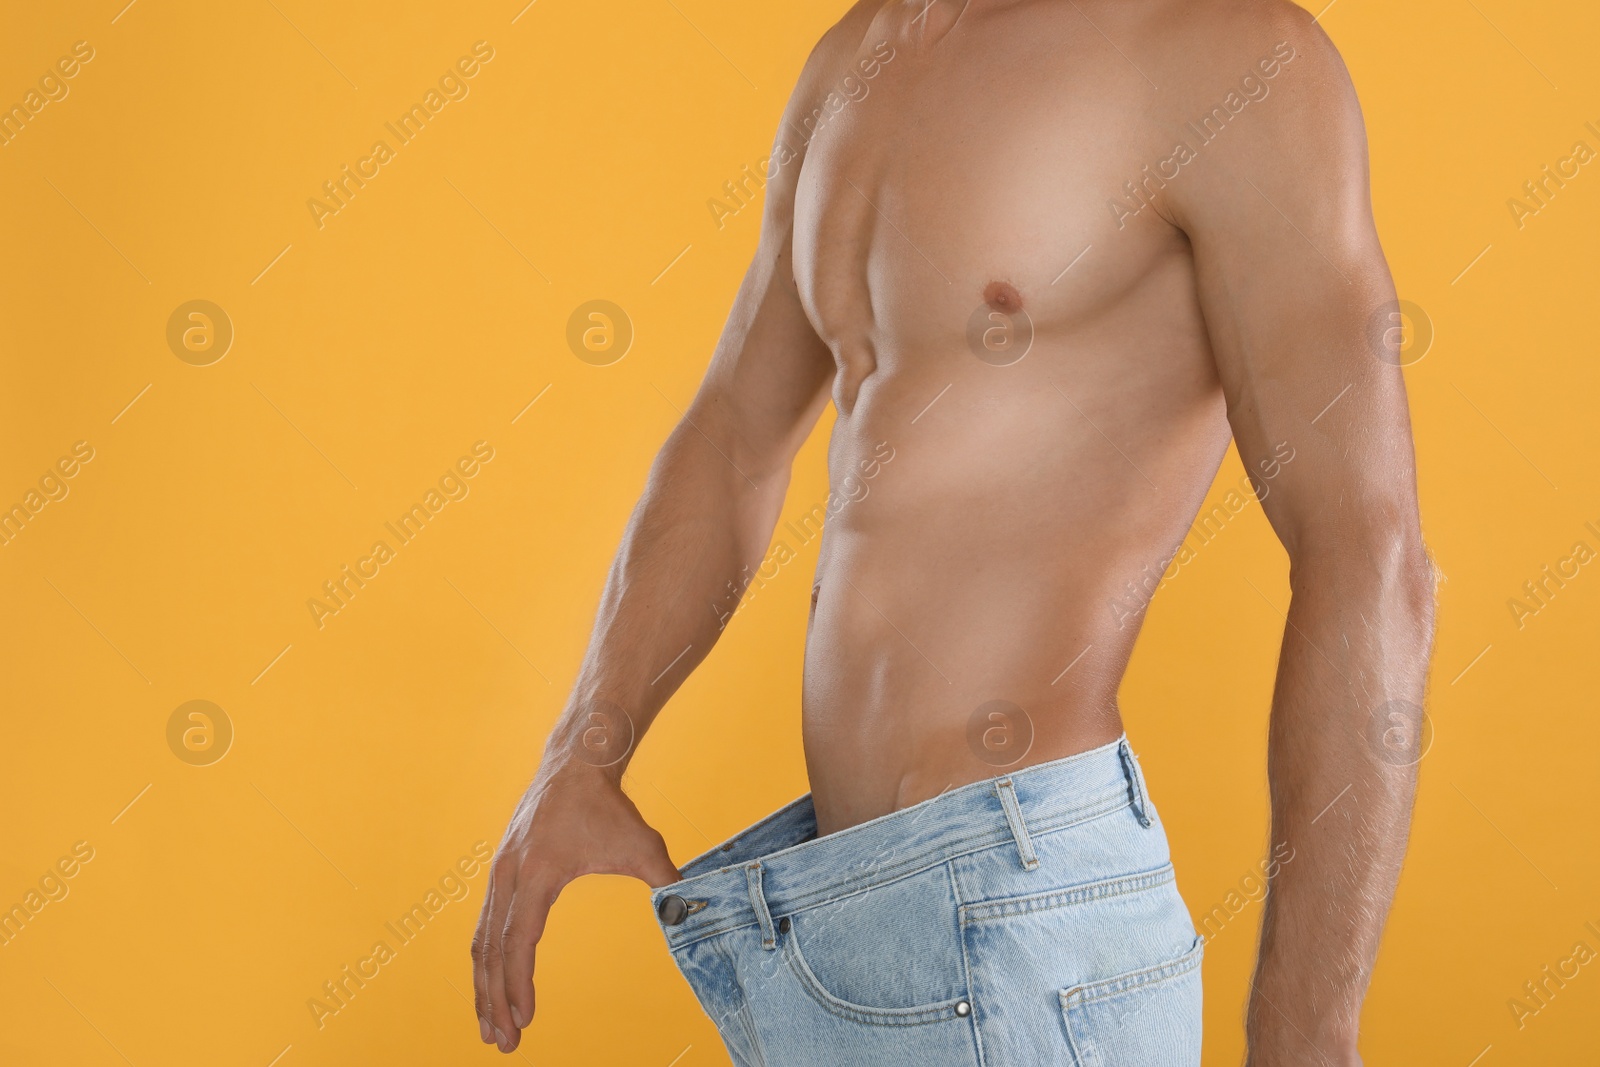 Photo of Shirtless man with slim body wearing big jeans on yellow background, closeup